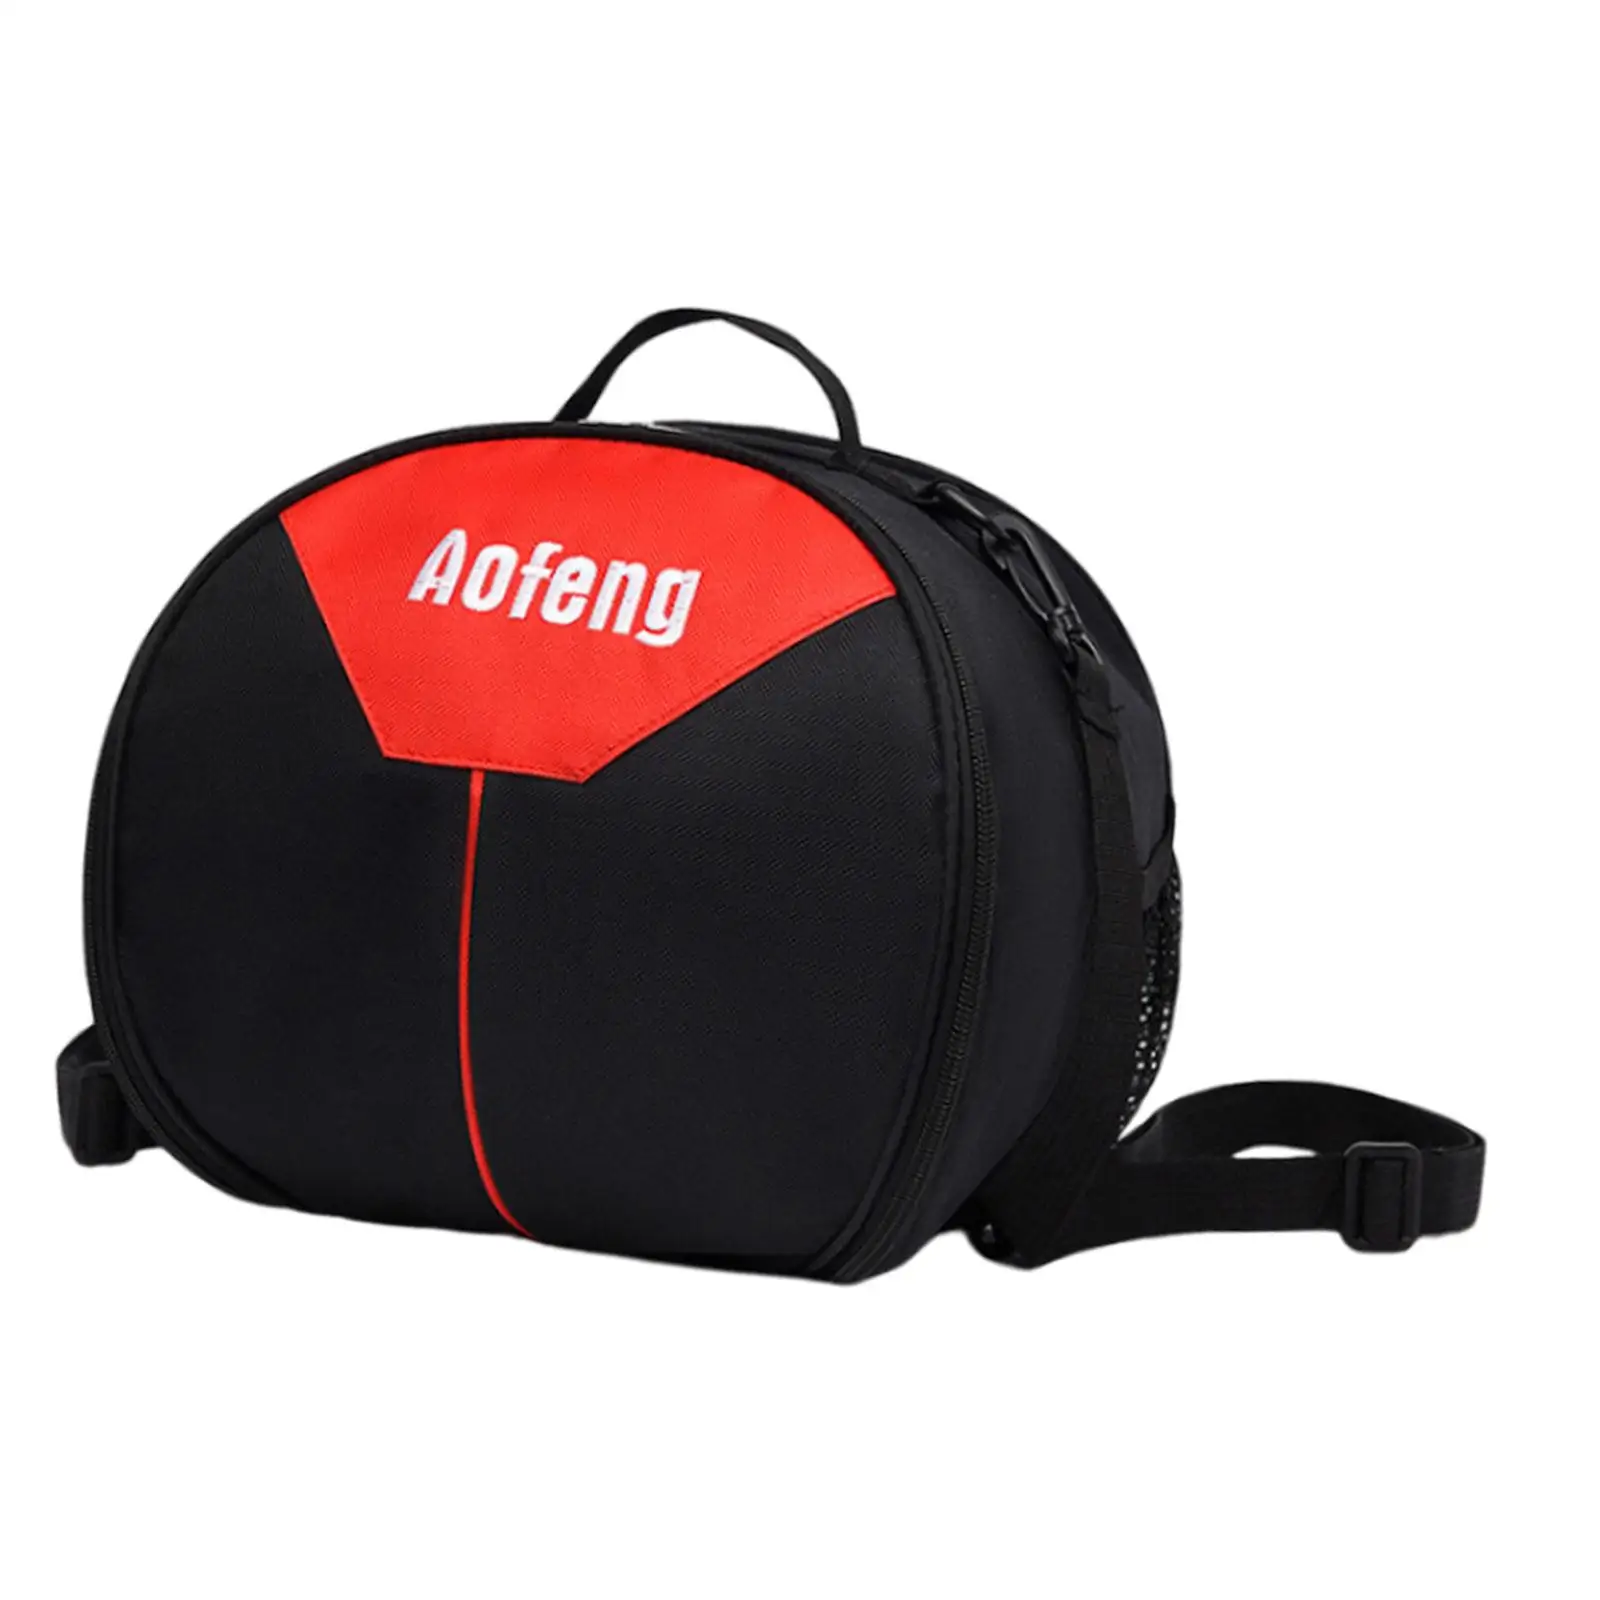 Basketball Shoulder Bag with 2 Side Pockets Dual Zippers Closure Durable Soccer Storage Bag for Softball Football Volleyball